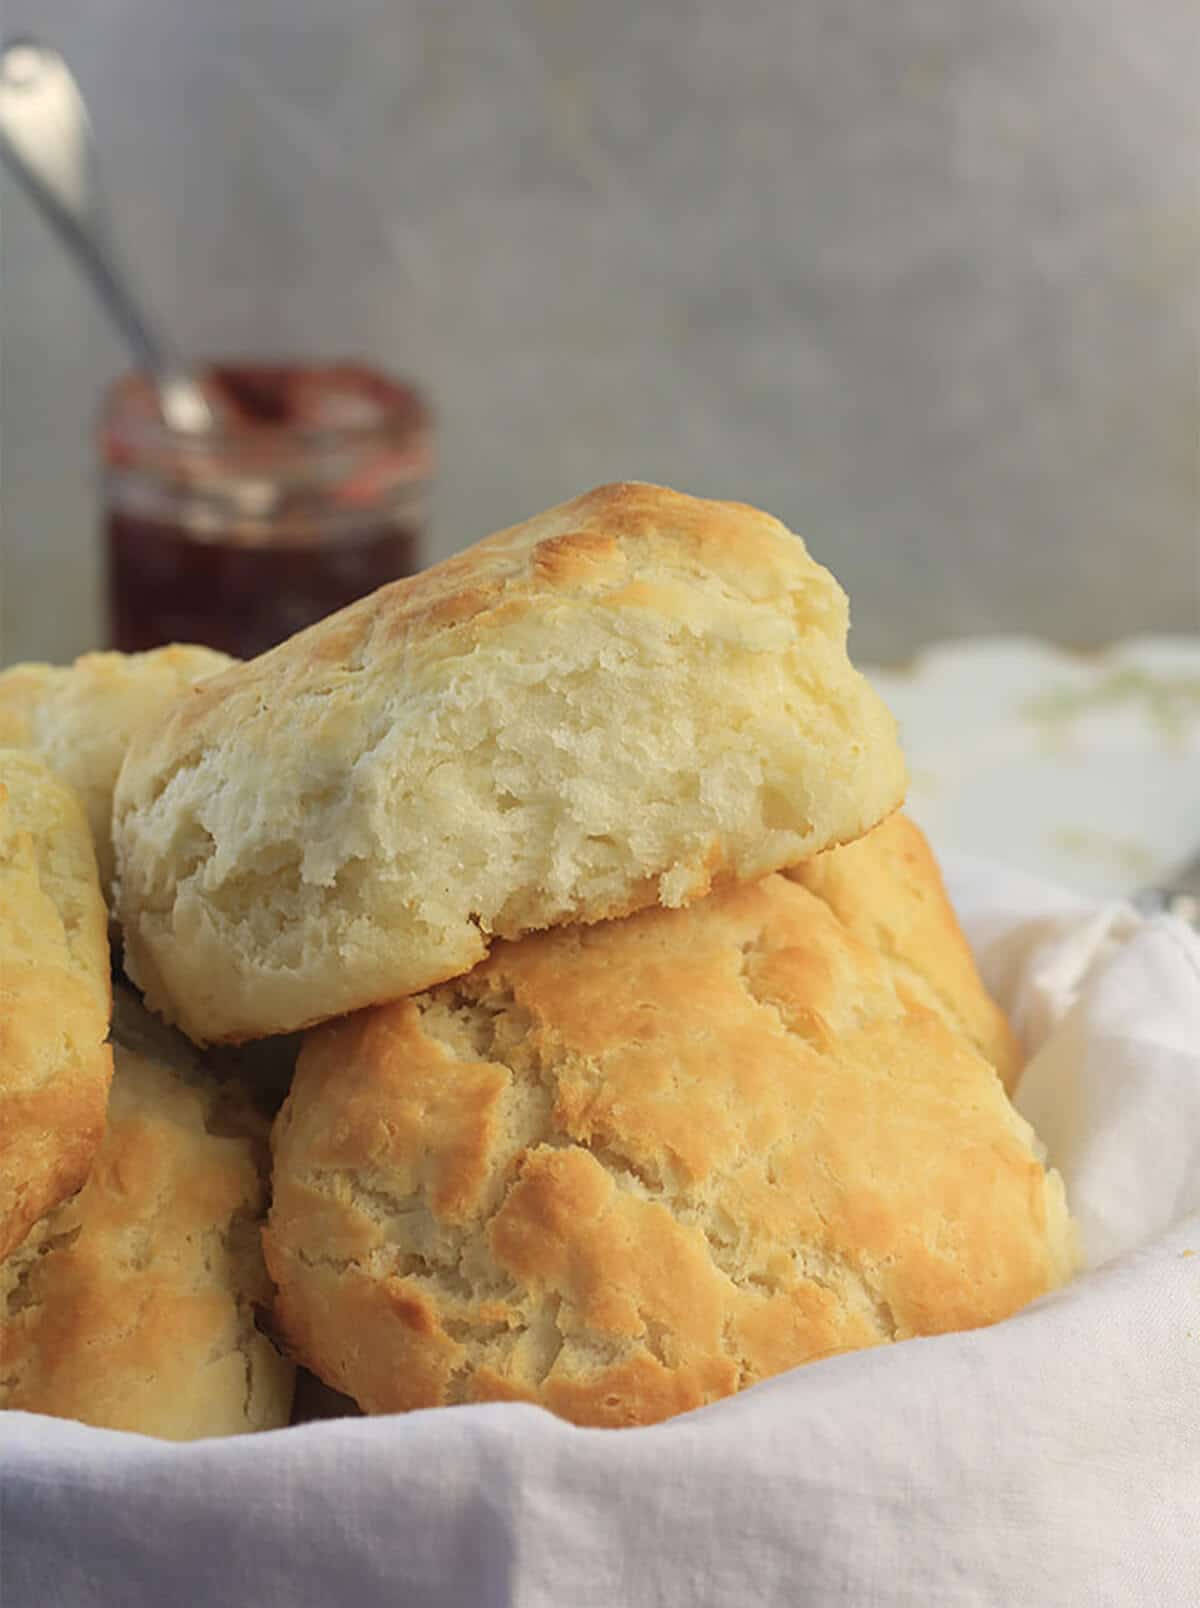 A basket of baked Southern style biscuits.